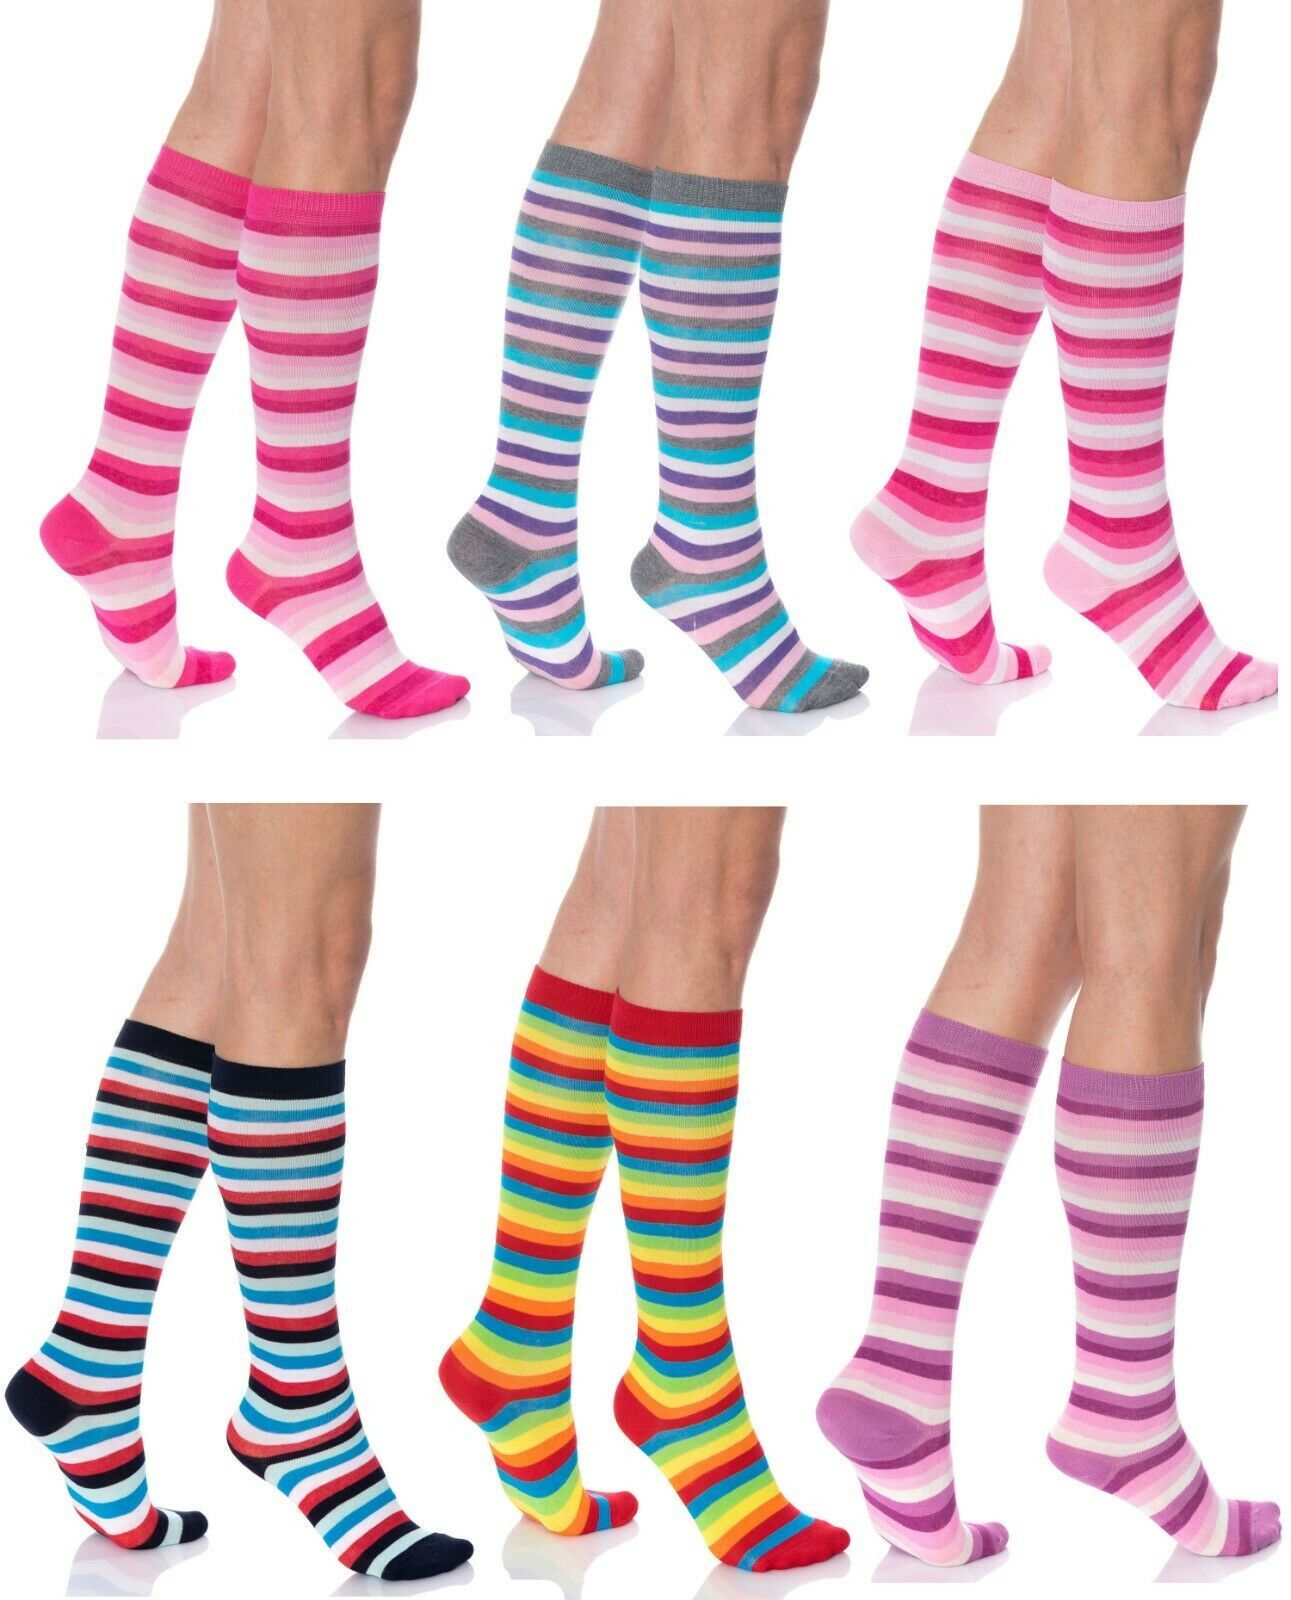 Striped Knee Socks for Women 6 Pairs Colorful Over the Calf Combed Cotton Socks